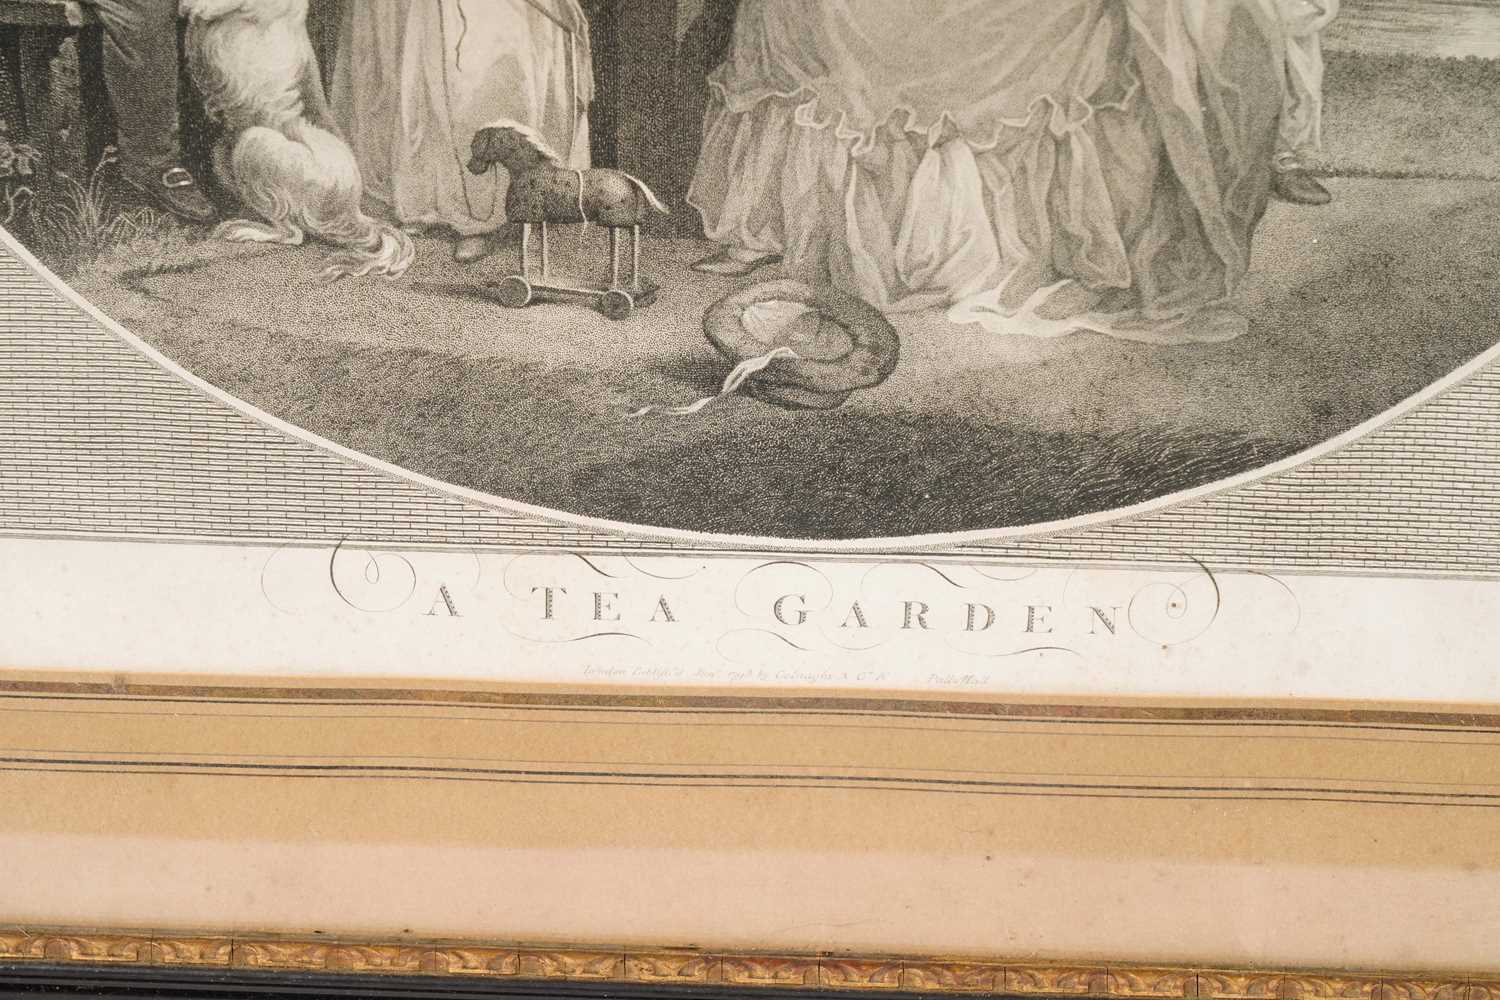 After George Morland - A Tea Garden | stipple engraving (1793) - Image 4 of 9